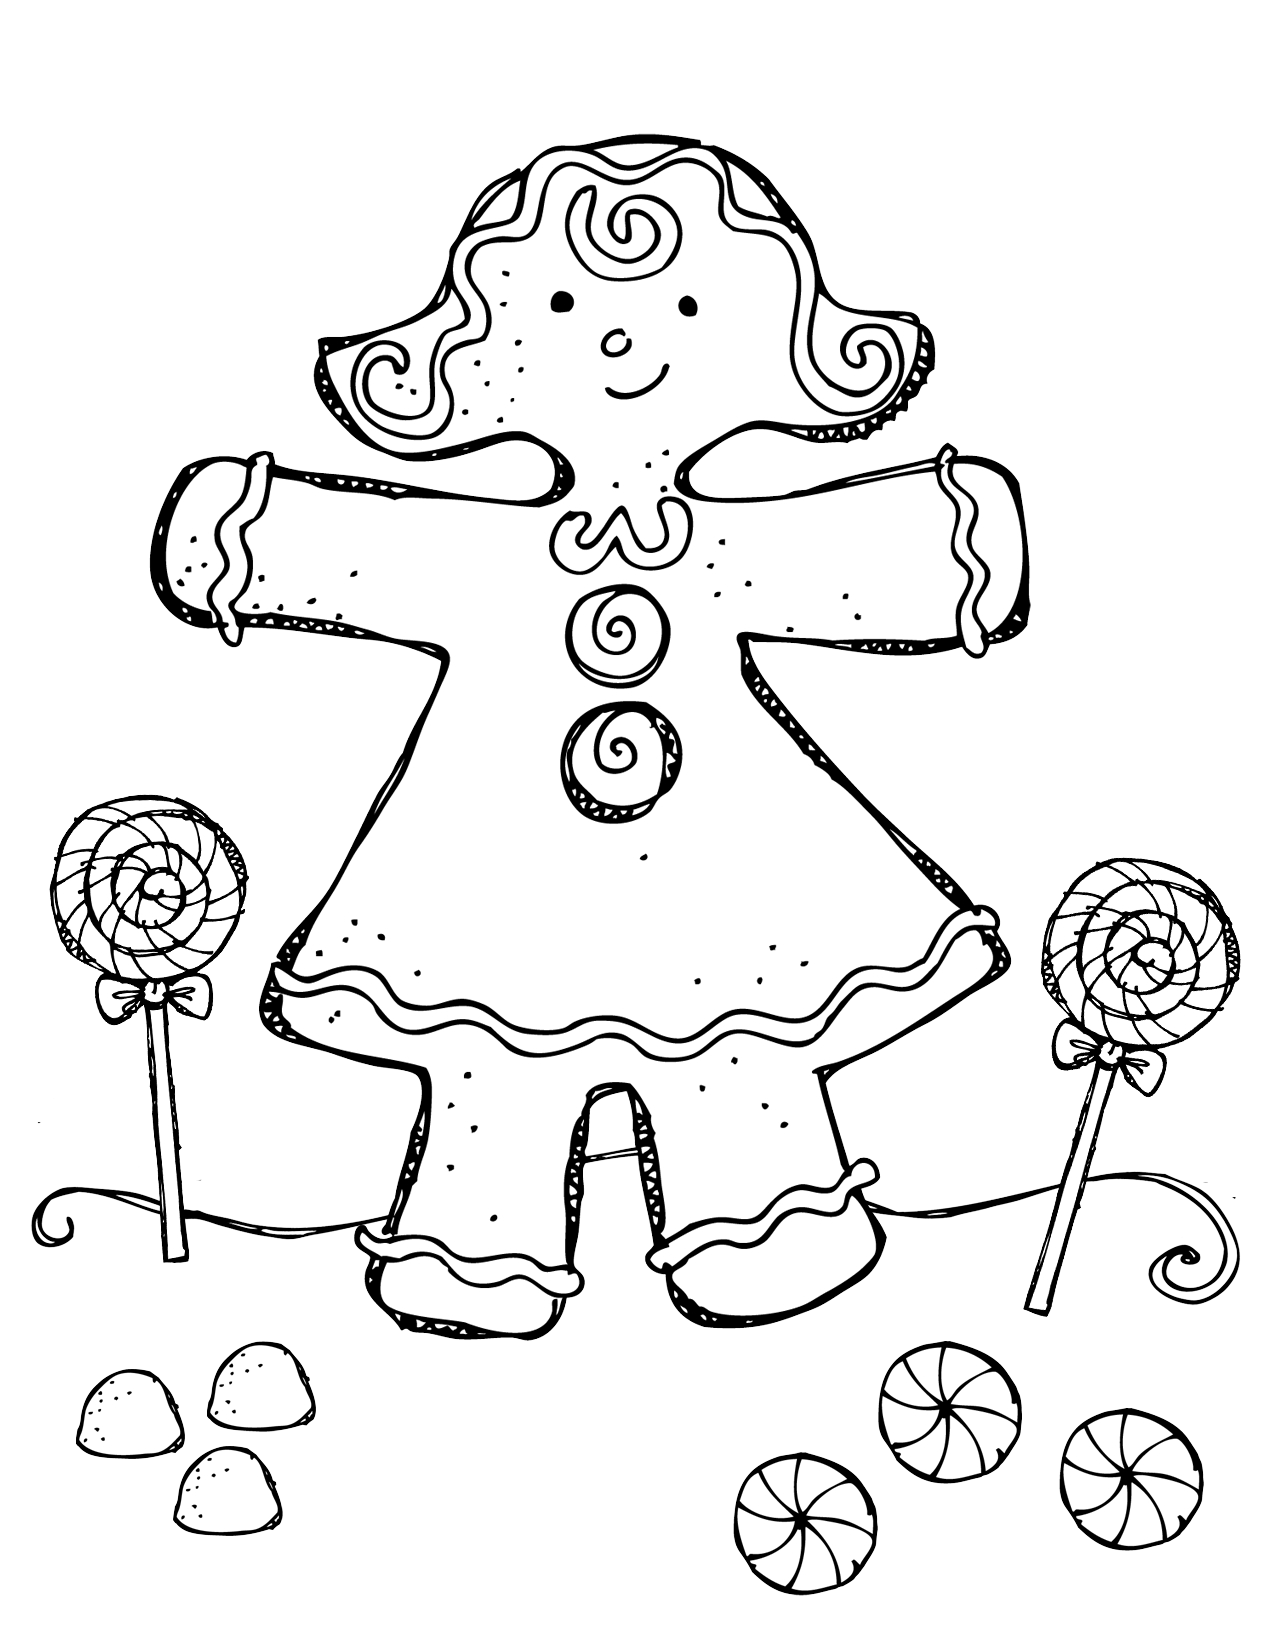 Gingerbread Boy Printable Coloring Pages: Gingerbread Man Coloring ...